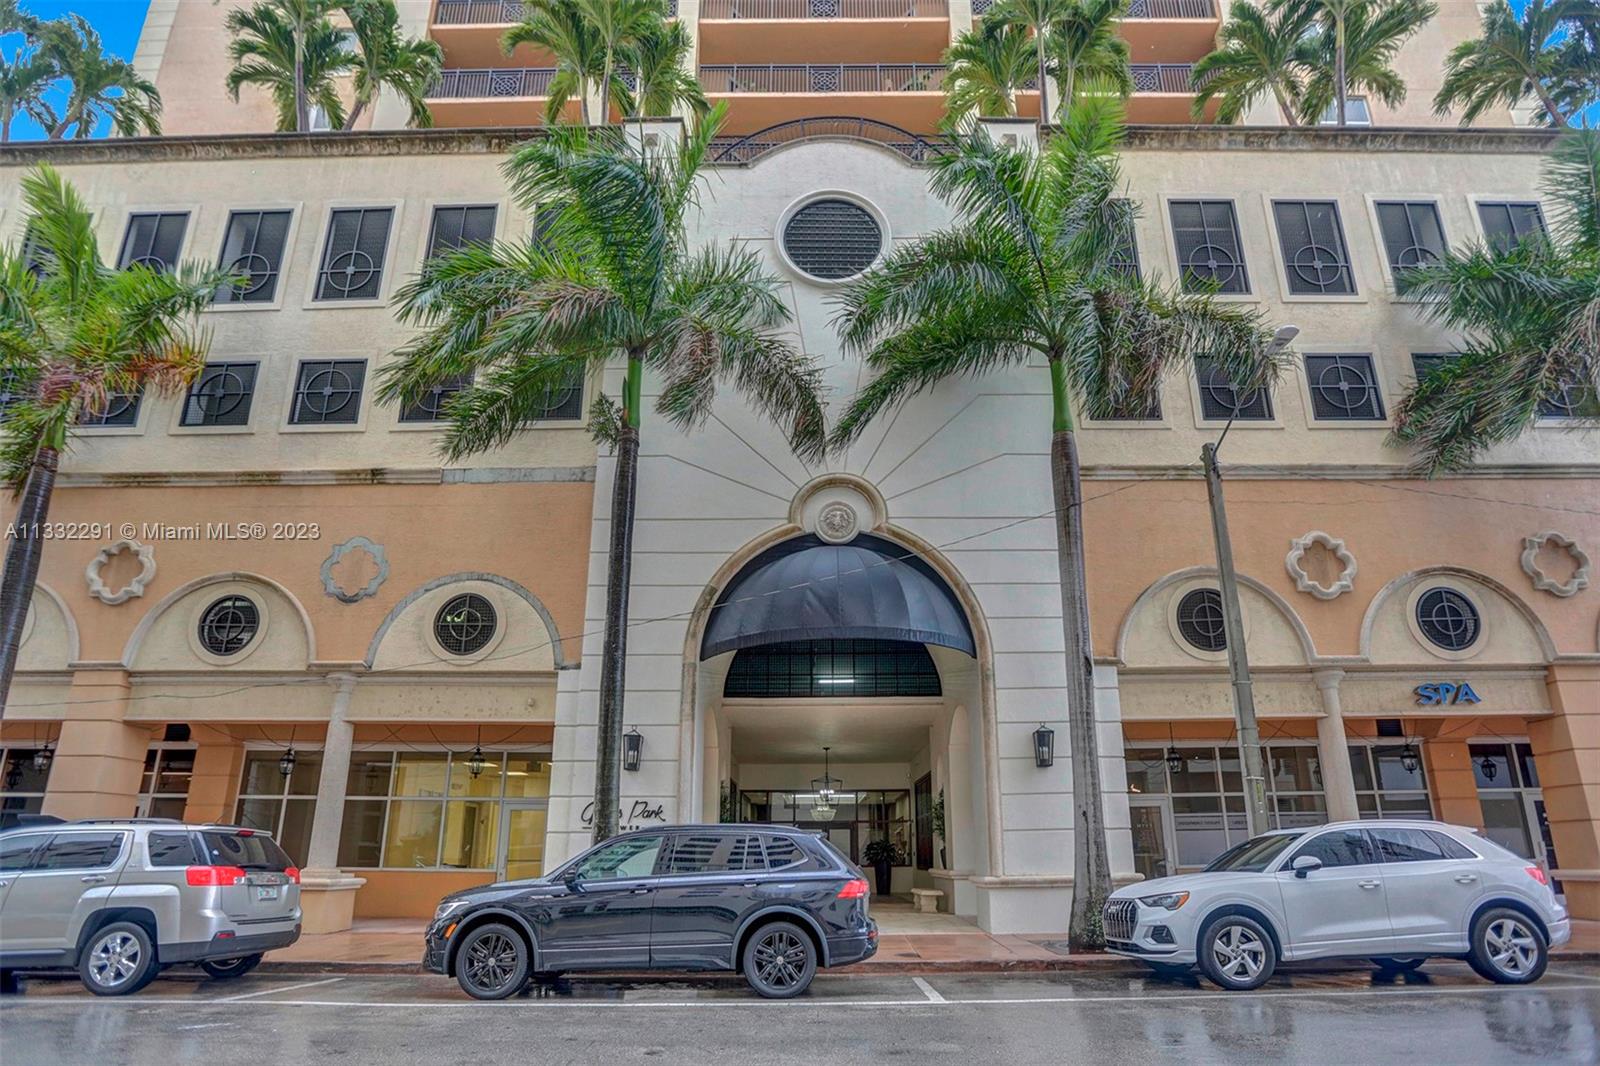 Great corner unit in Gables Park Tower, with a magnificent view of Coral Gables and the Biltmore Hotel, strategically located near Miracle Mile and less than 4 miles from the Miami Airport. The unit has 2 BEDROOMS, 2 FULL BATHROOMS PLUS DEN, which can be used as a 3rd bedroom or office. Freshly painted, all impact windows and doors throughout, wood flooring, new light fixtures and new appliances, washer & dryer in the unit, 2 ASSIGNED COVERED PARKING SPACES. The building has a pool, gym, visitor parking and 24-hour concierge service. No pets.